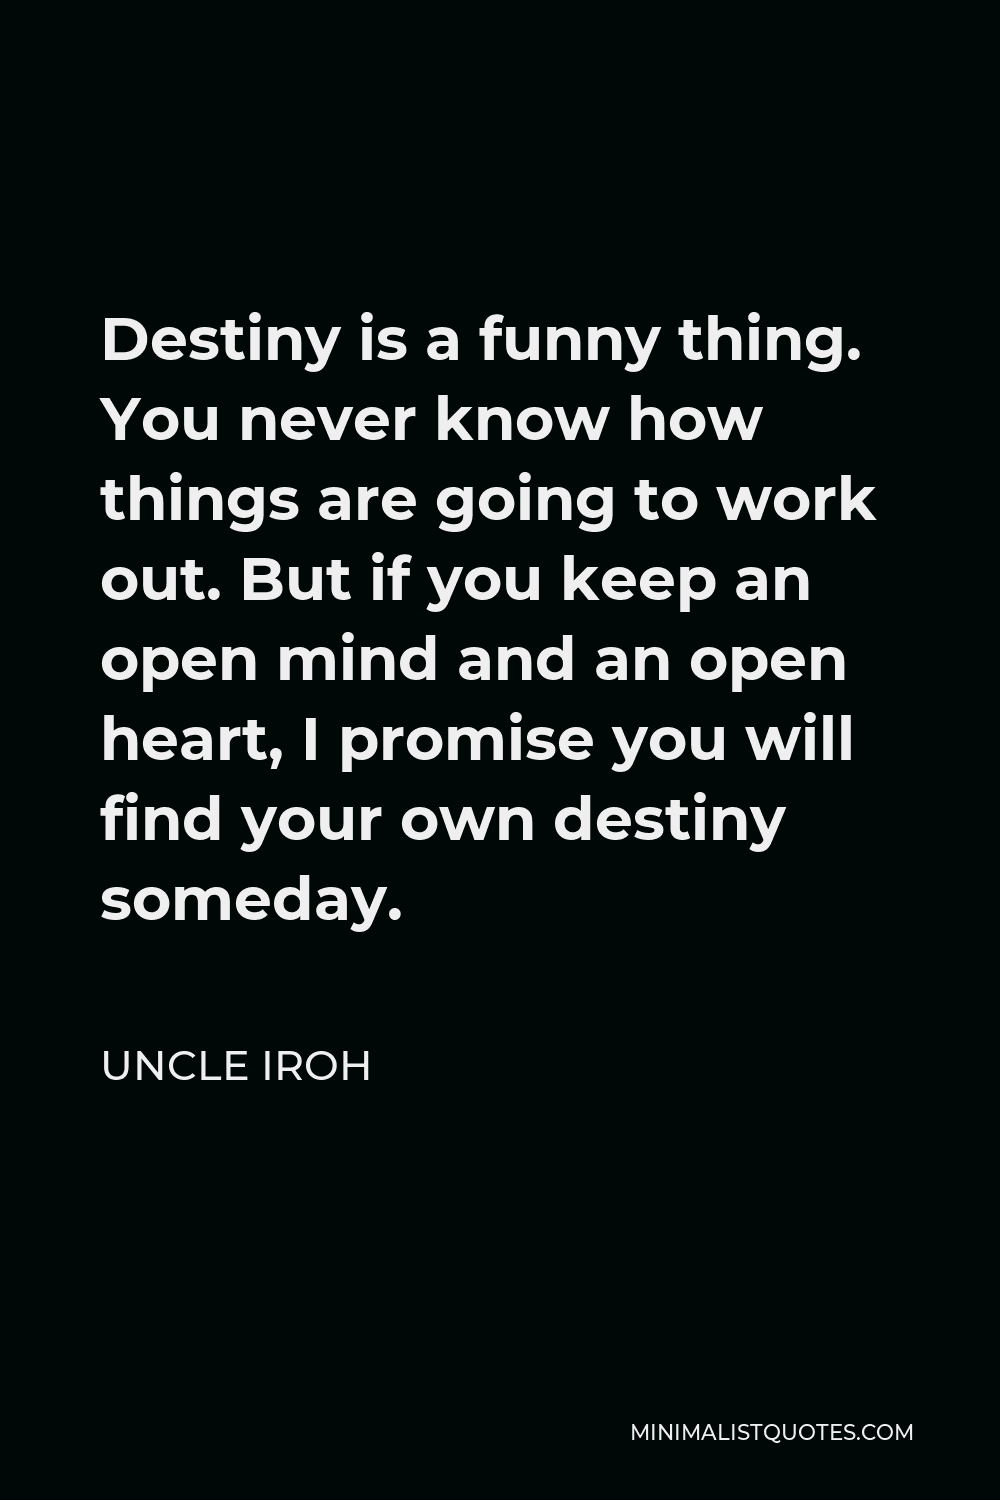 Uncle Iroh Quote - Destiny is a funny thing. You never know how things are going to work out. But if you keep an open mind and an open heart, I promise you will find your own destiny someday.